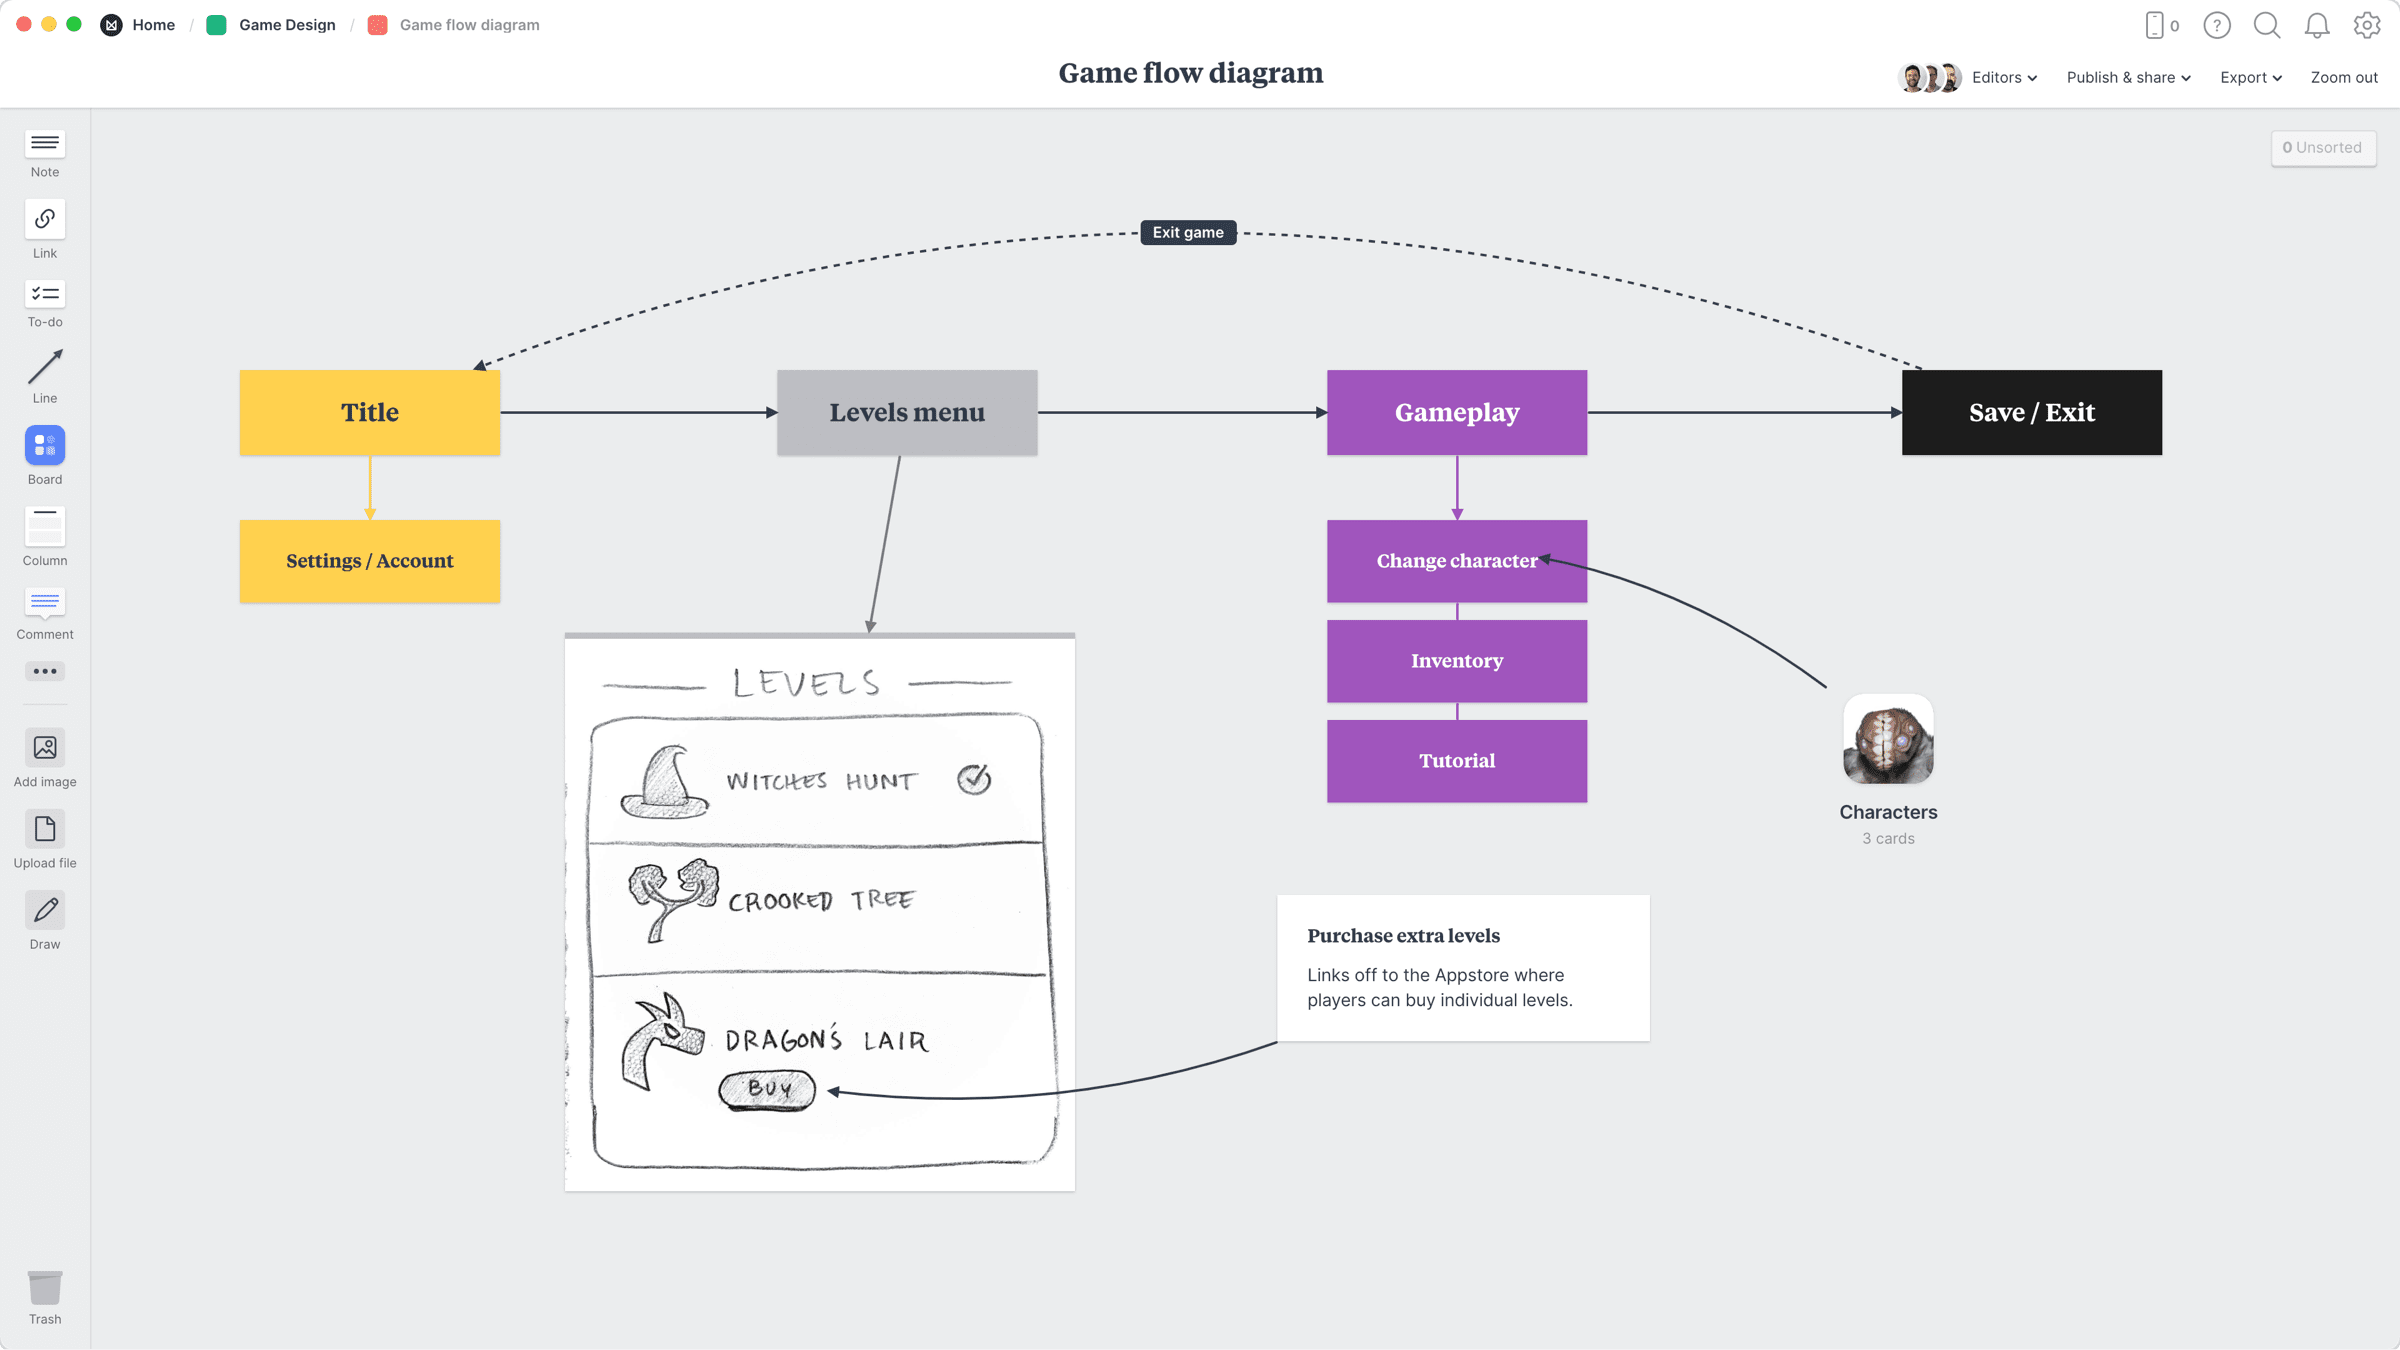 Game Flow Diagram Template, within the Milanote app